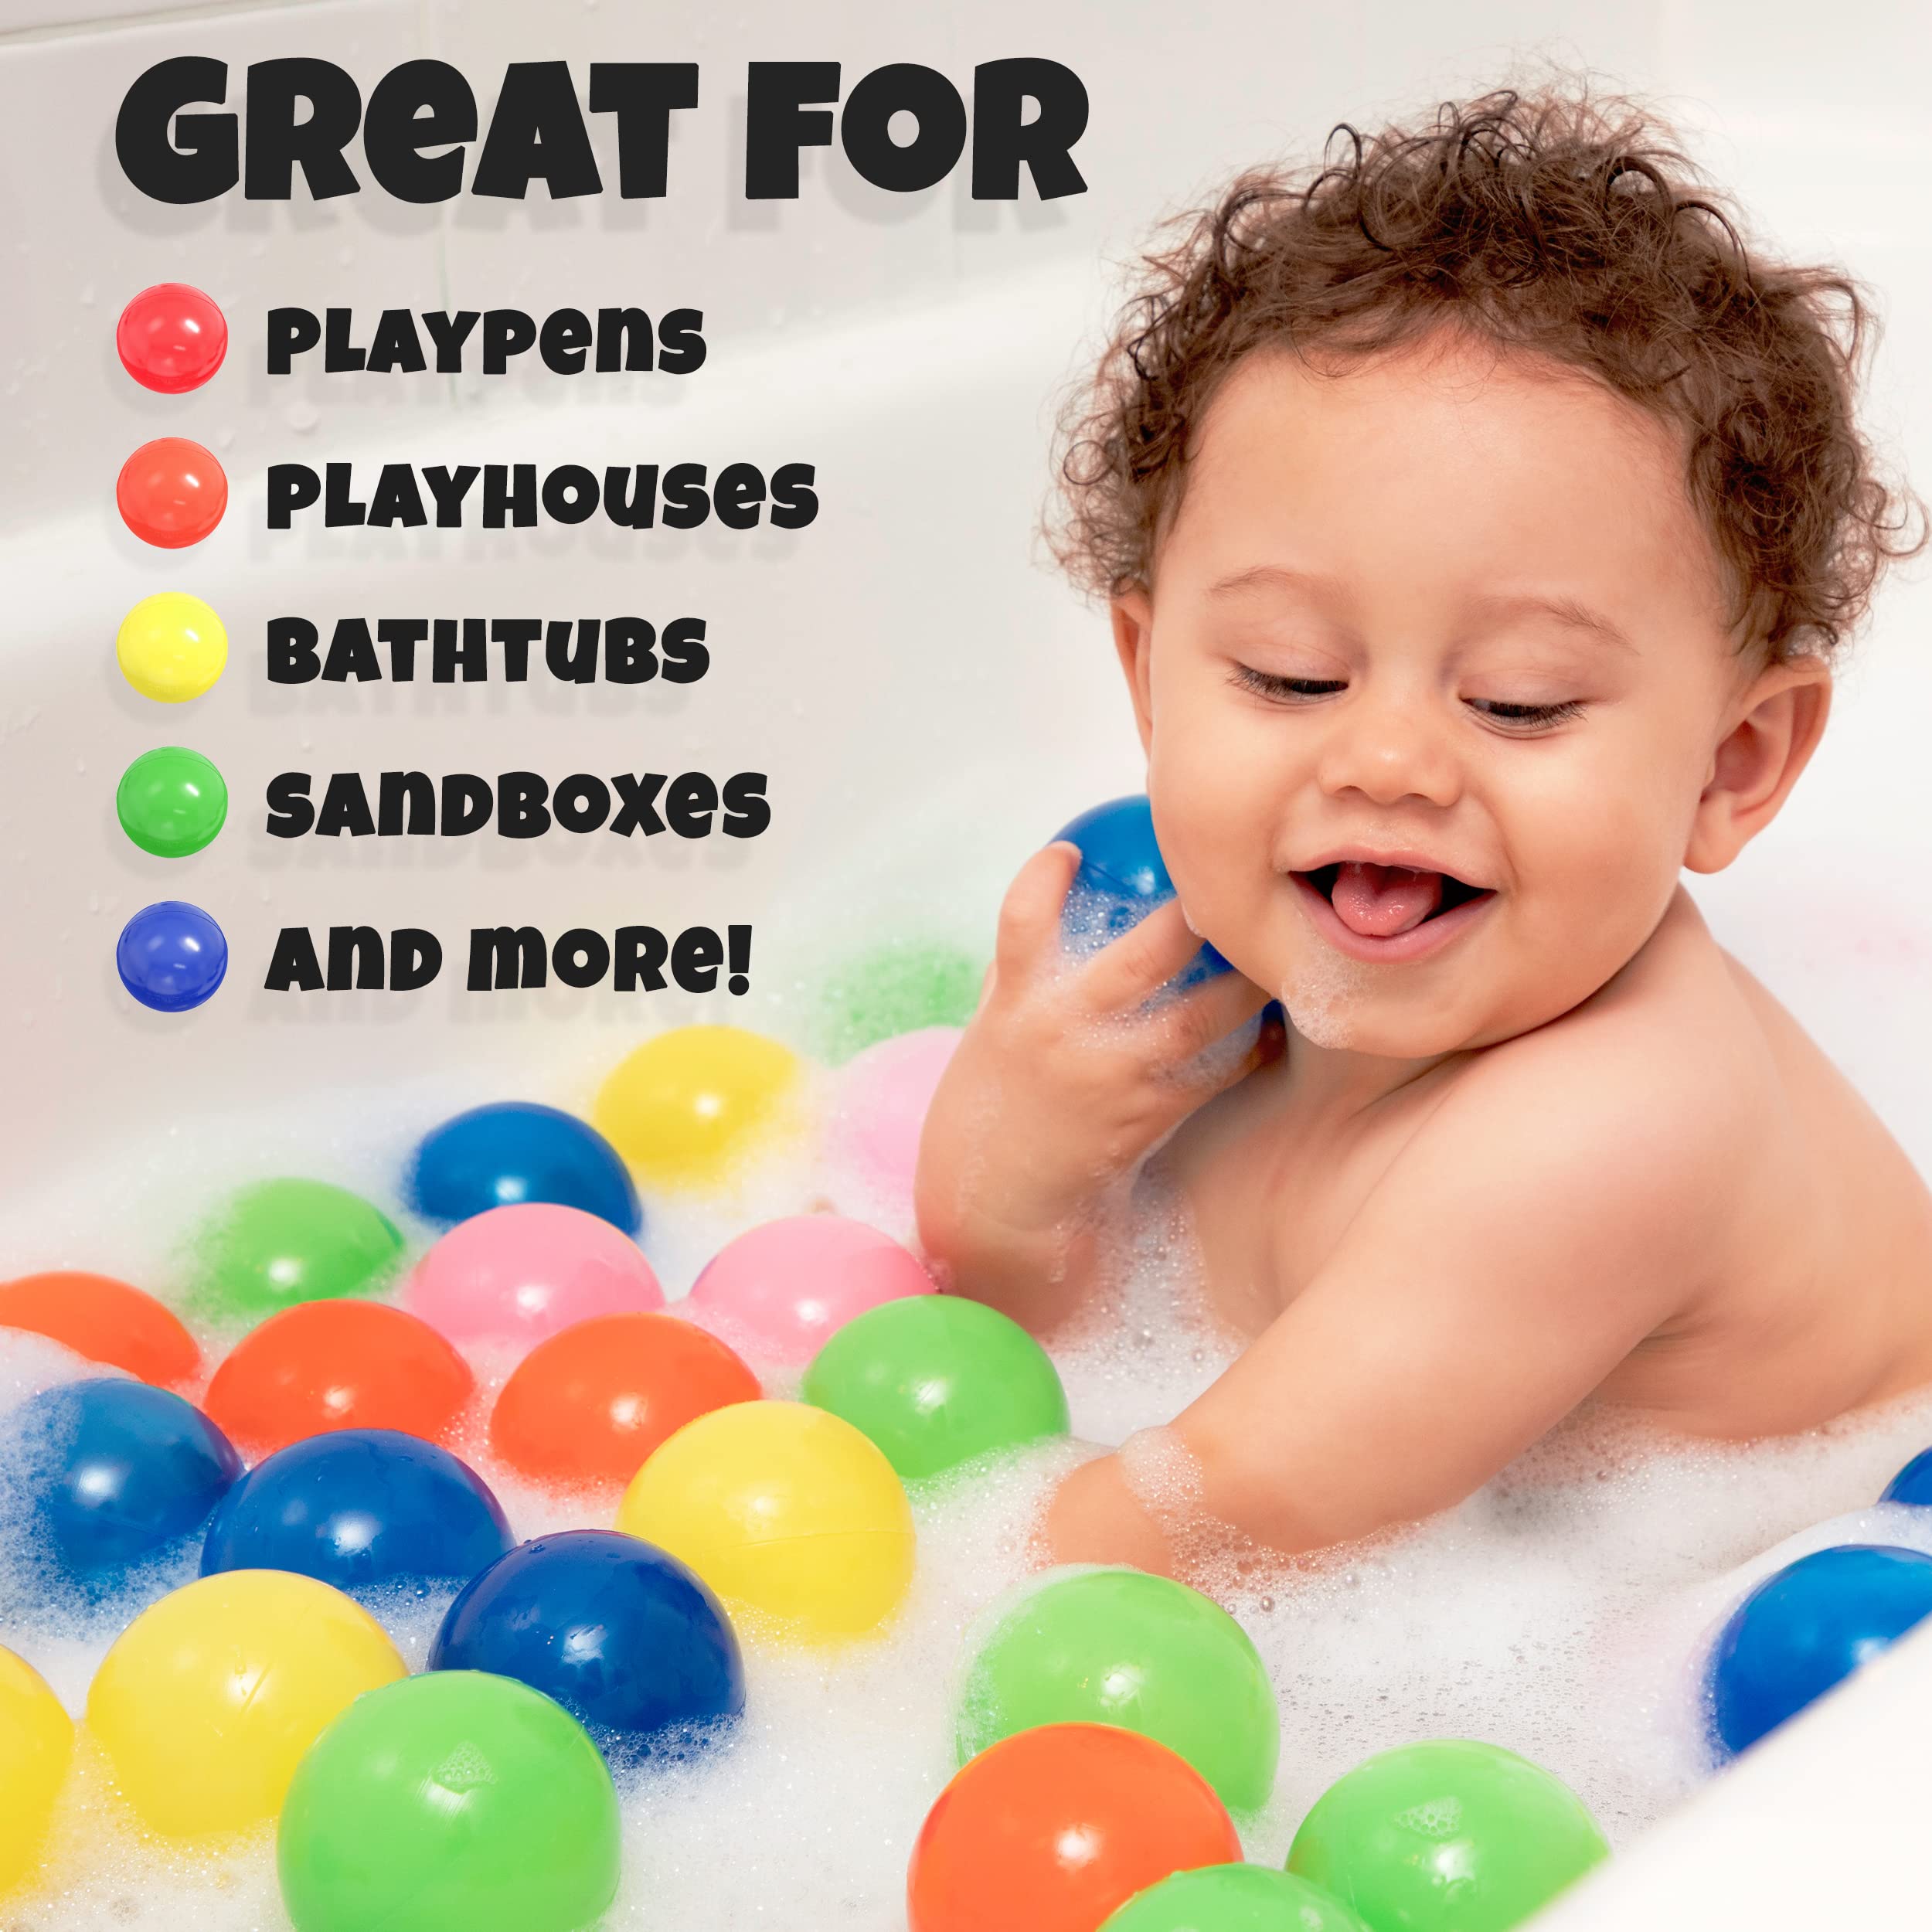 Click N' Play Plastic Balls for Ball Pit, Phthalate & BPA Free, Crush Proof Play Balls for Ball Pit, Pit Balls in Assorted Colors in Reusable and Durable Storage Mesh Bag with Zipper | 200, 1000 count